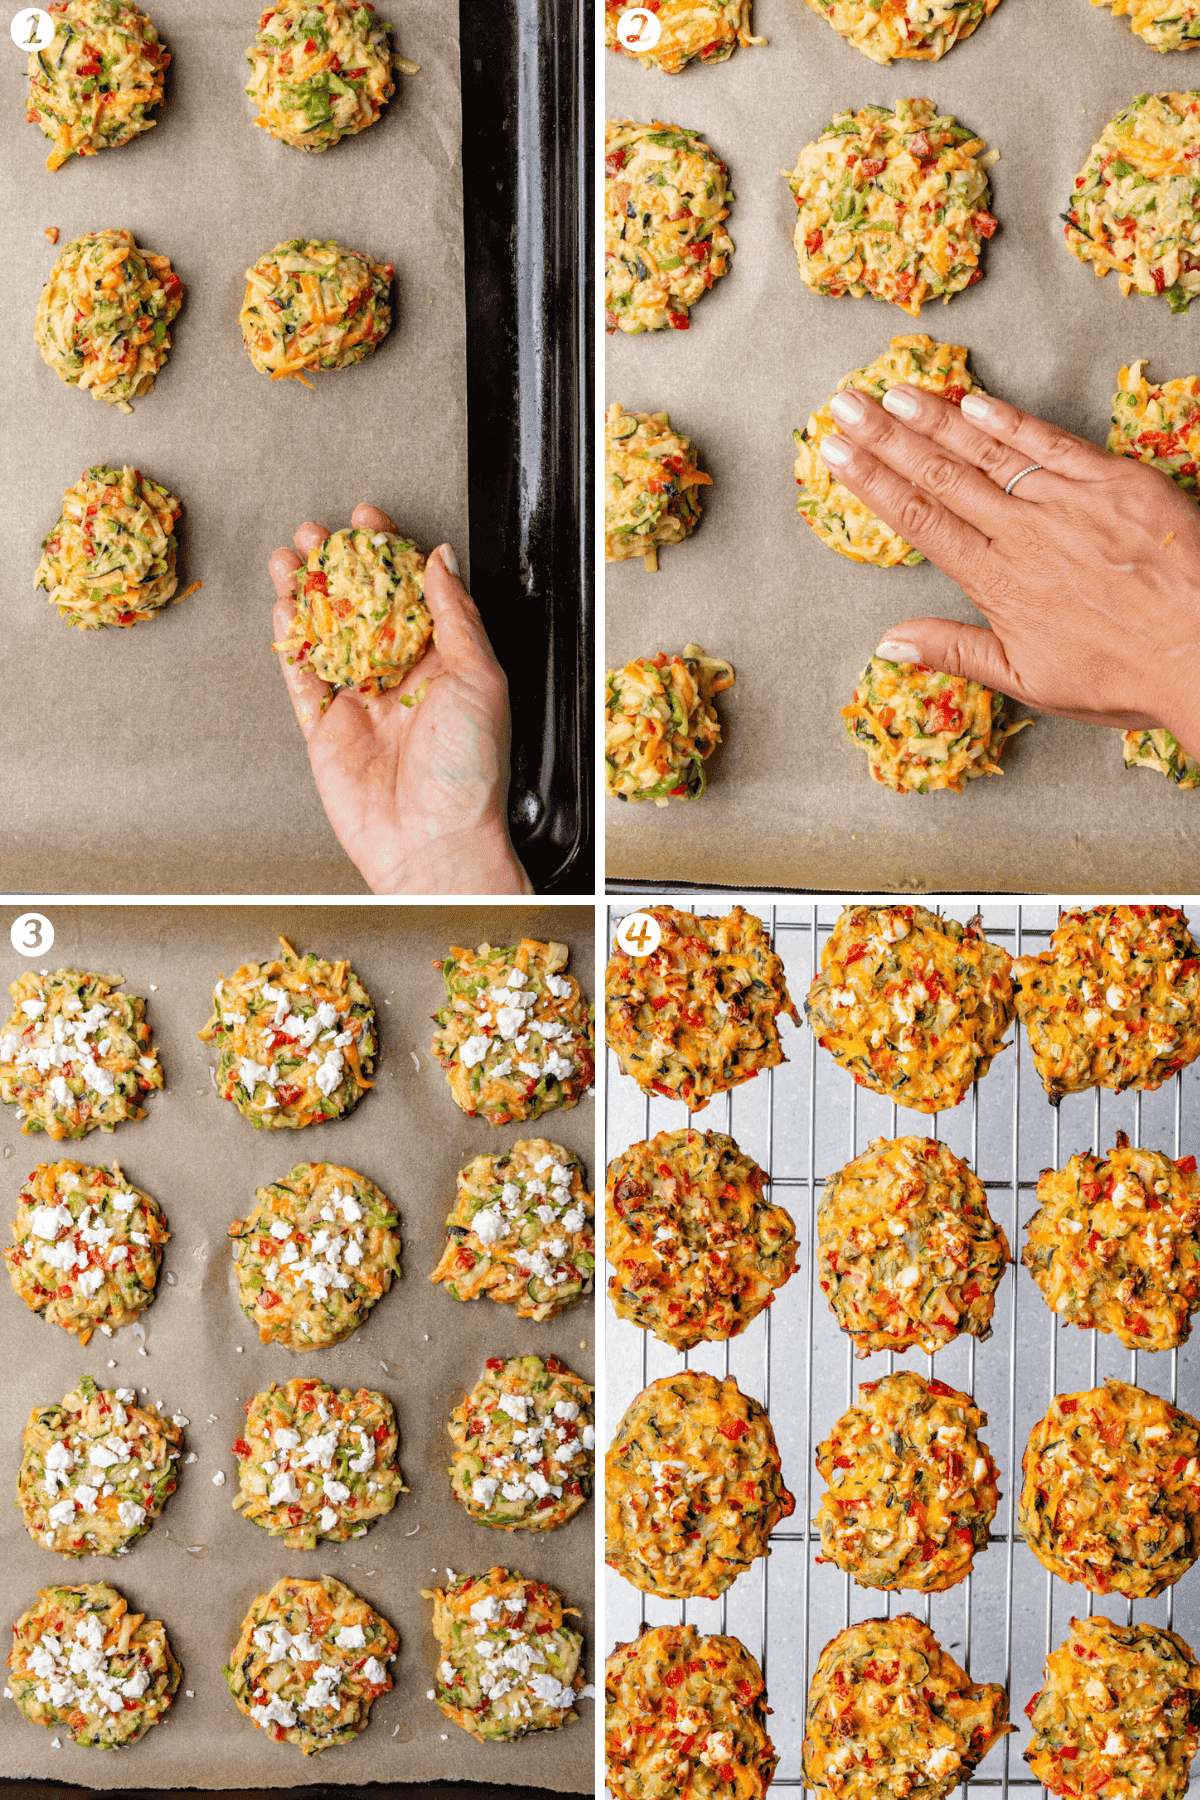 Steps on how to make healthy baked vegetable fritters part 2